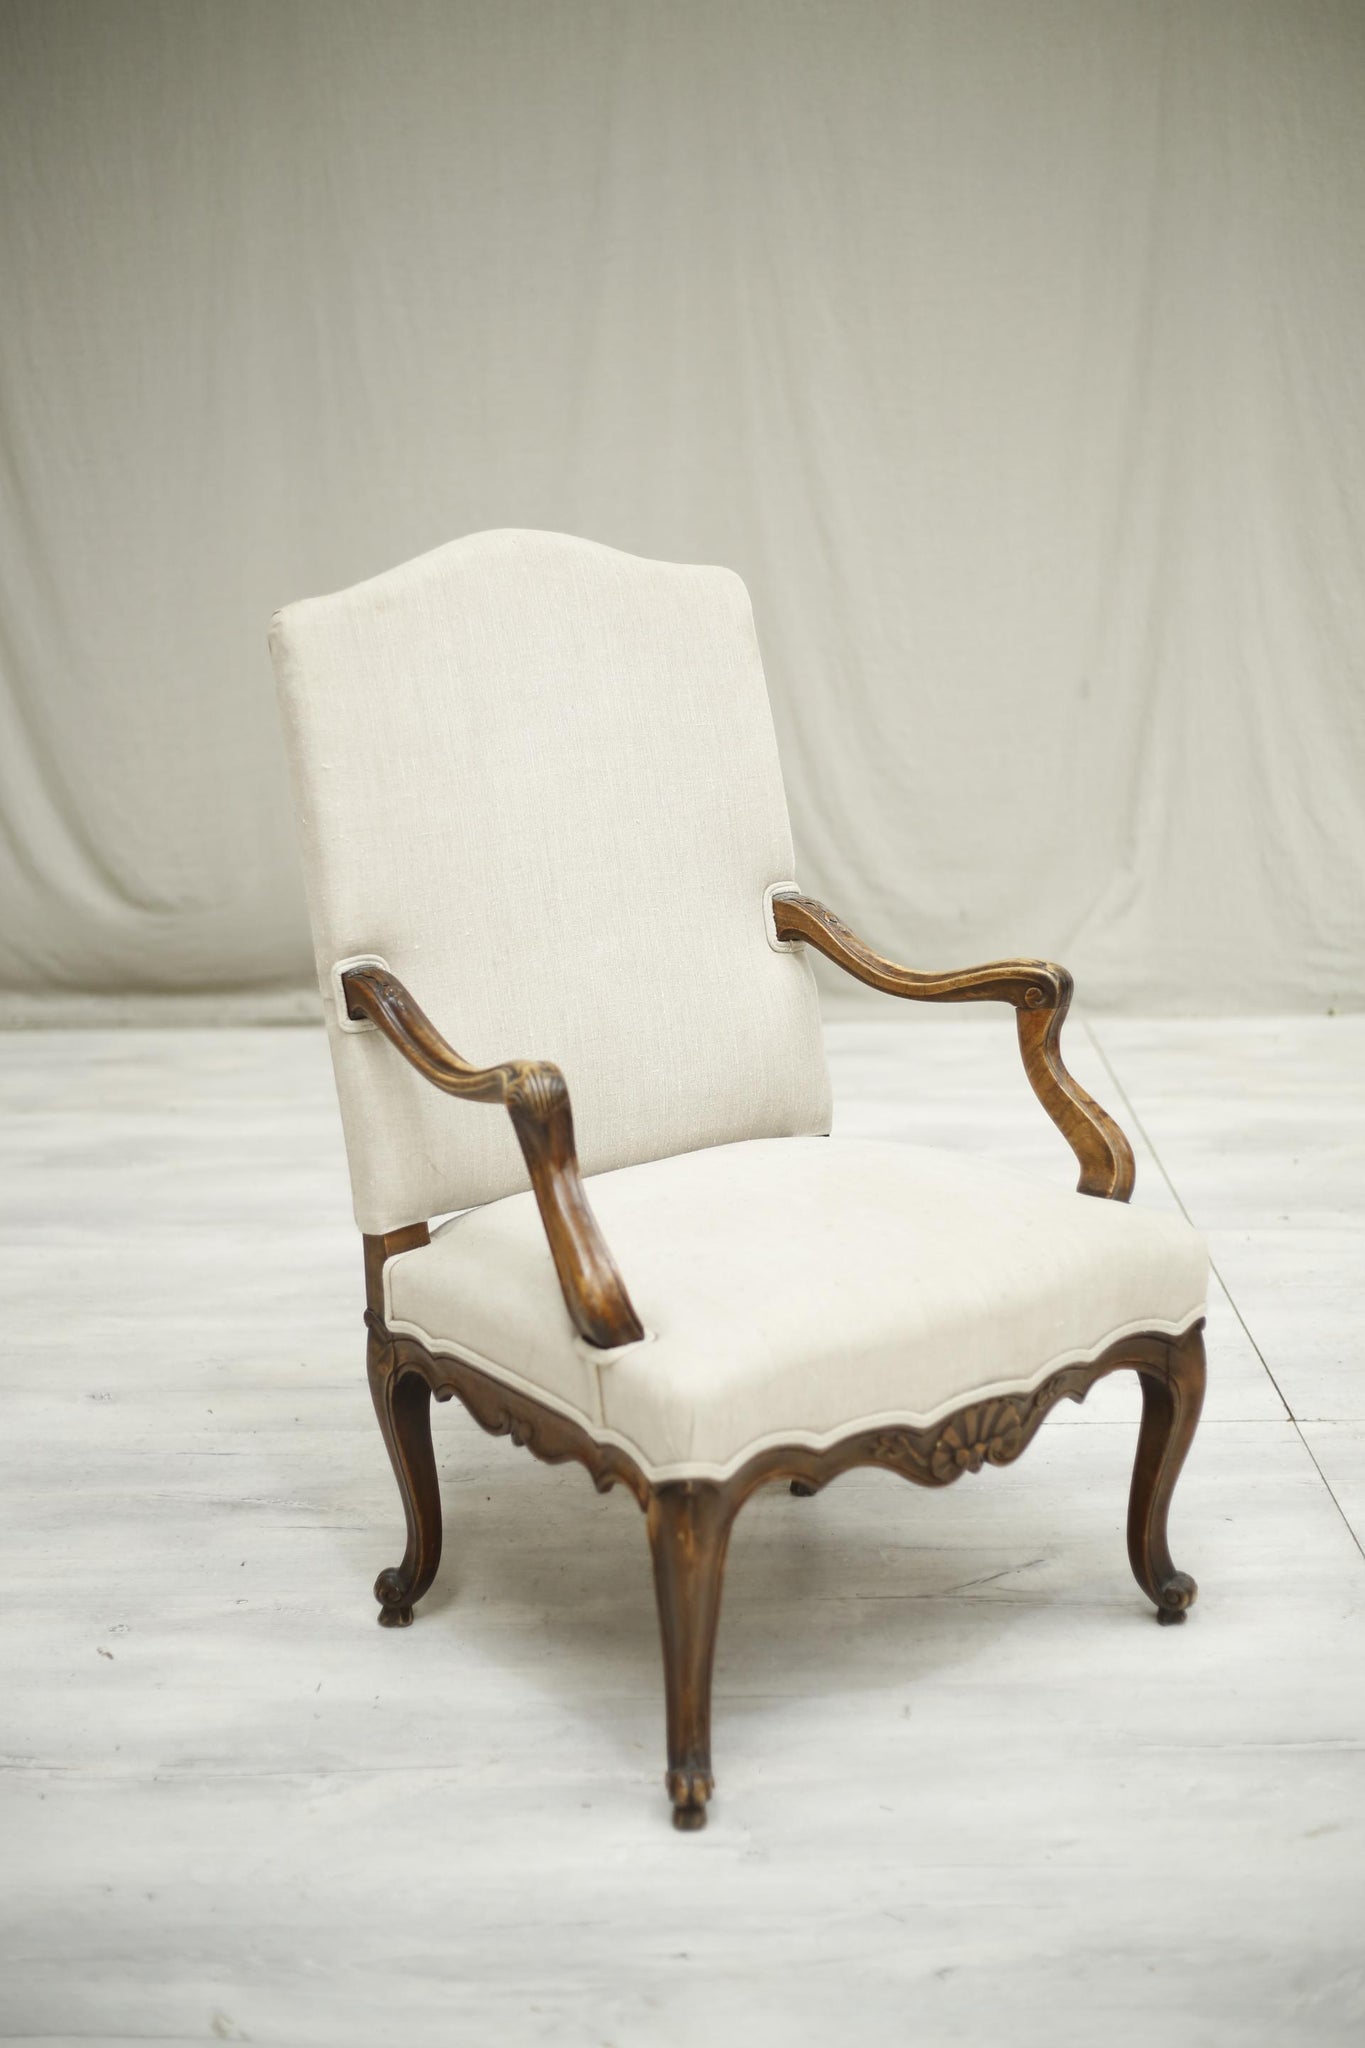 Antique 19th century Carved French open armchair